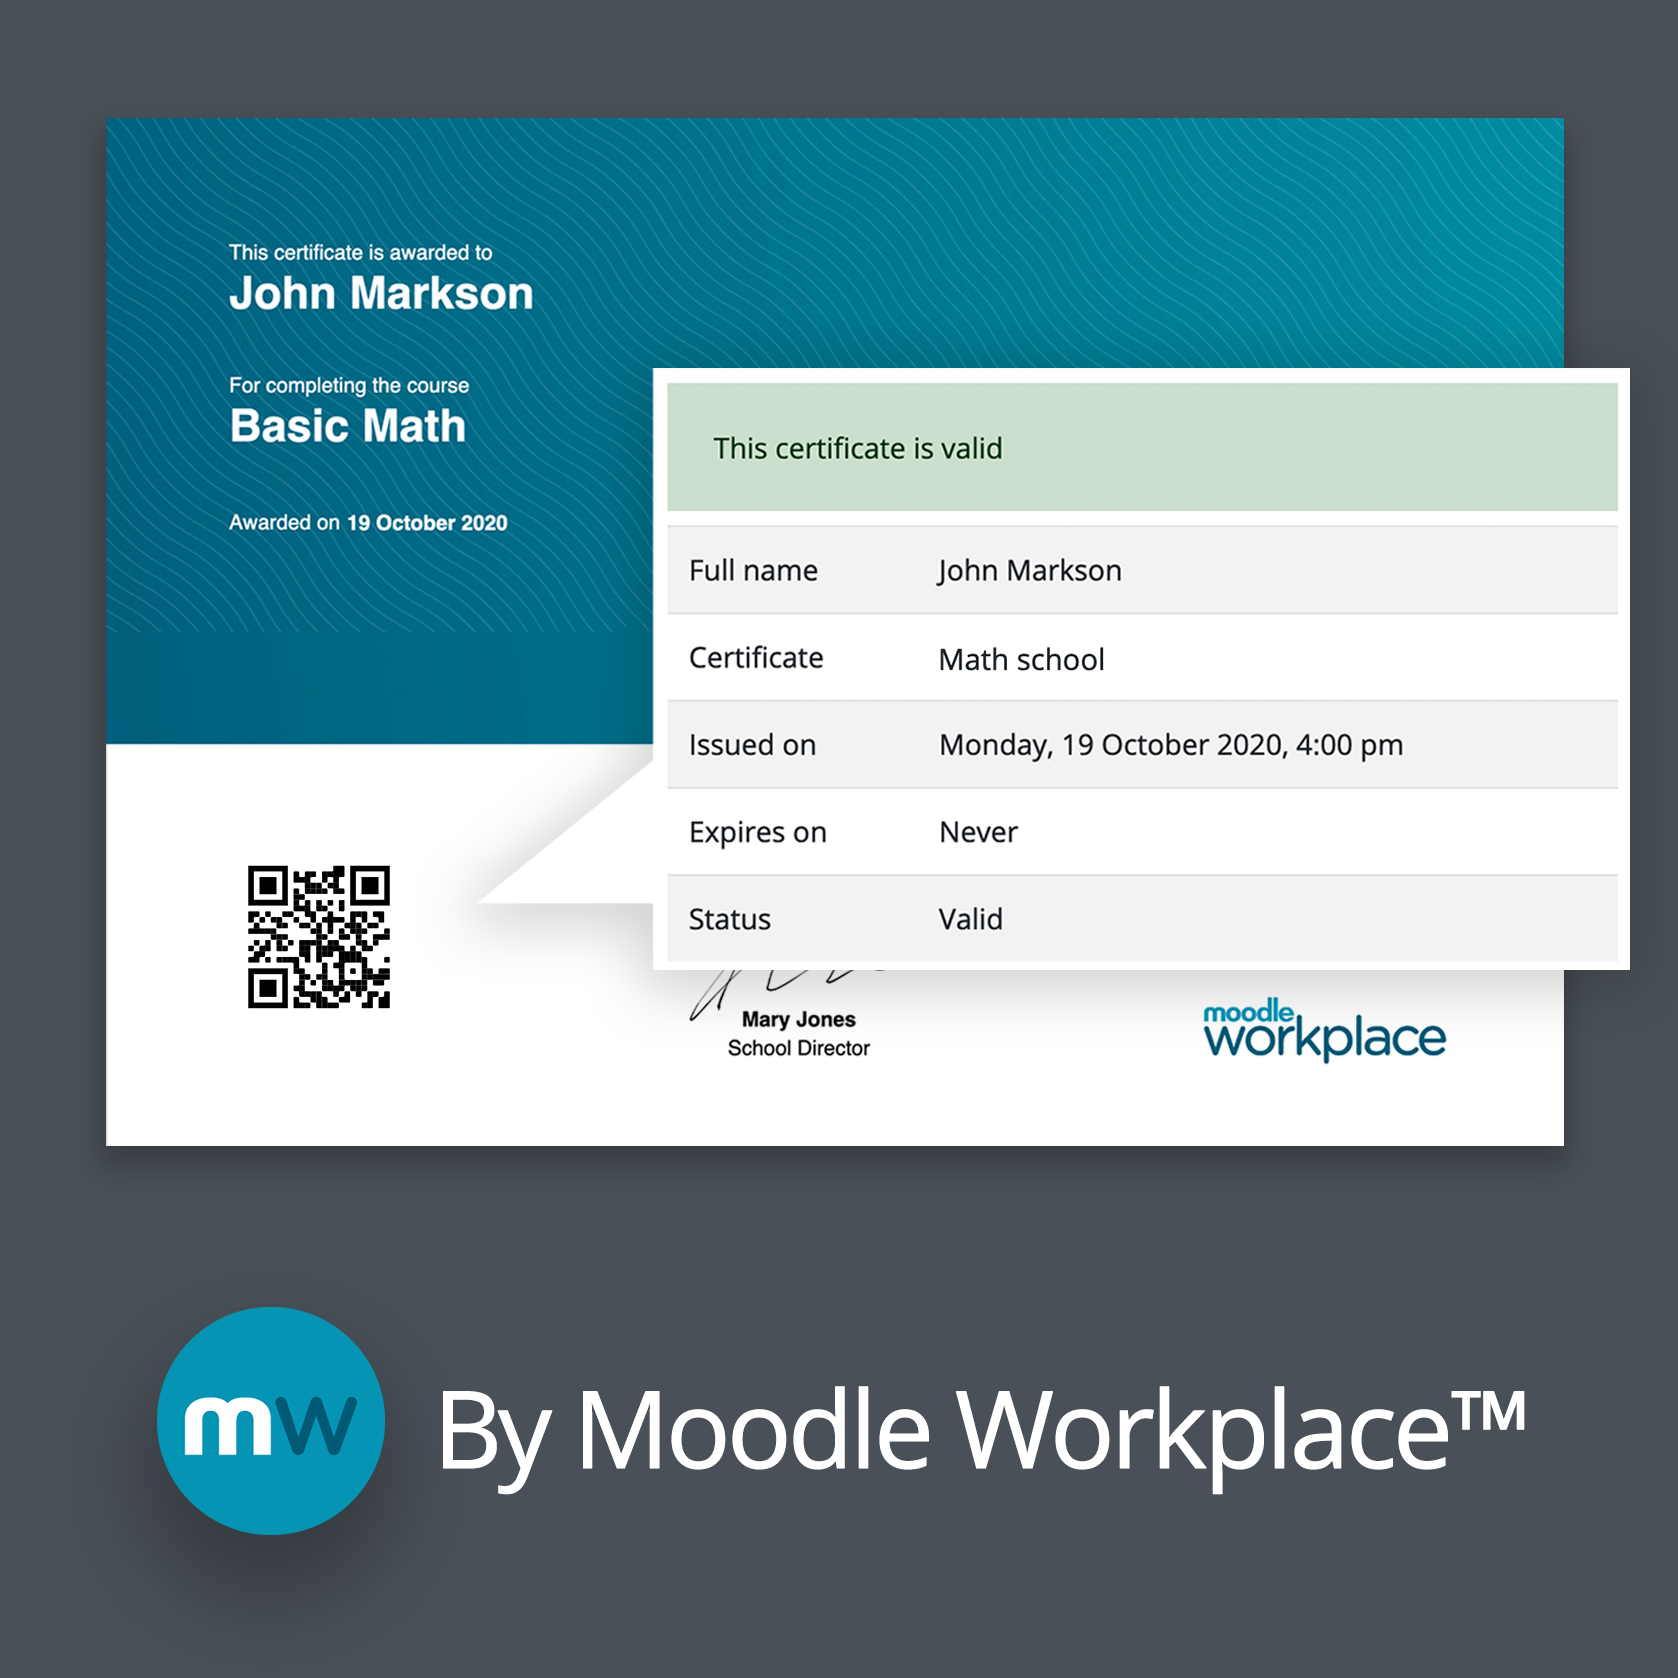 Moodle Certificate plugins released by the Moodle Workplace team